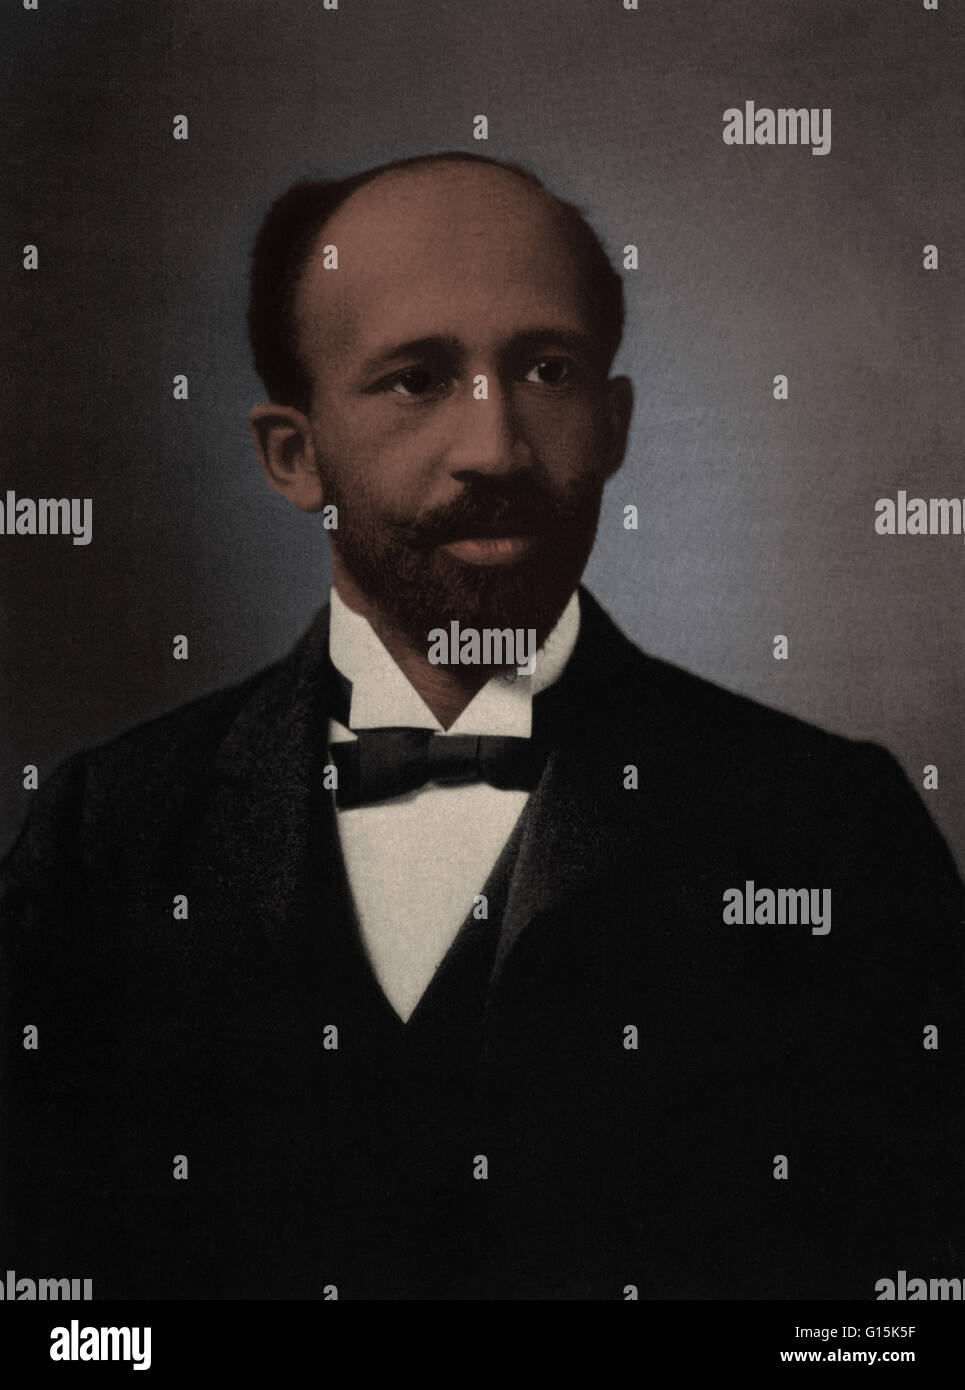 William Edward Burghardt (W.E.B.) Du Bois (1868-1963) was an African-American sociologist, historian, civil rights activist, Pan-Africanist, author and editor. Du Bois grew up in a tolerant community and experienced little racism as a child. After graduat Stock Photo